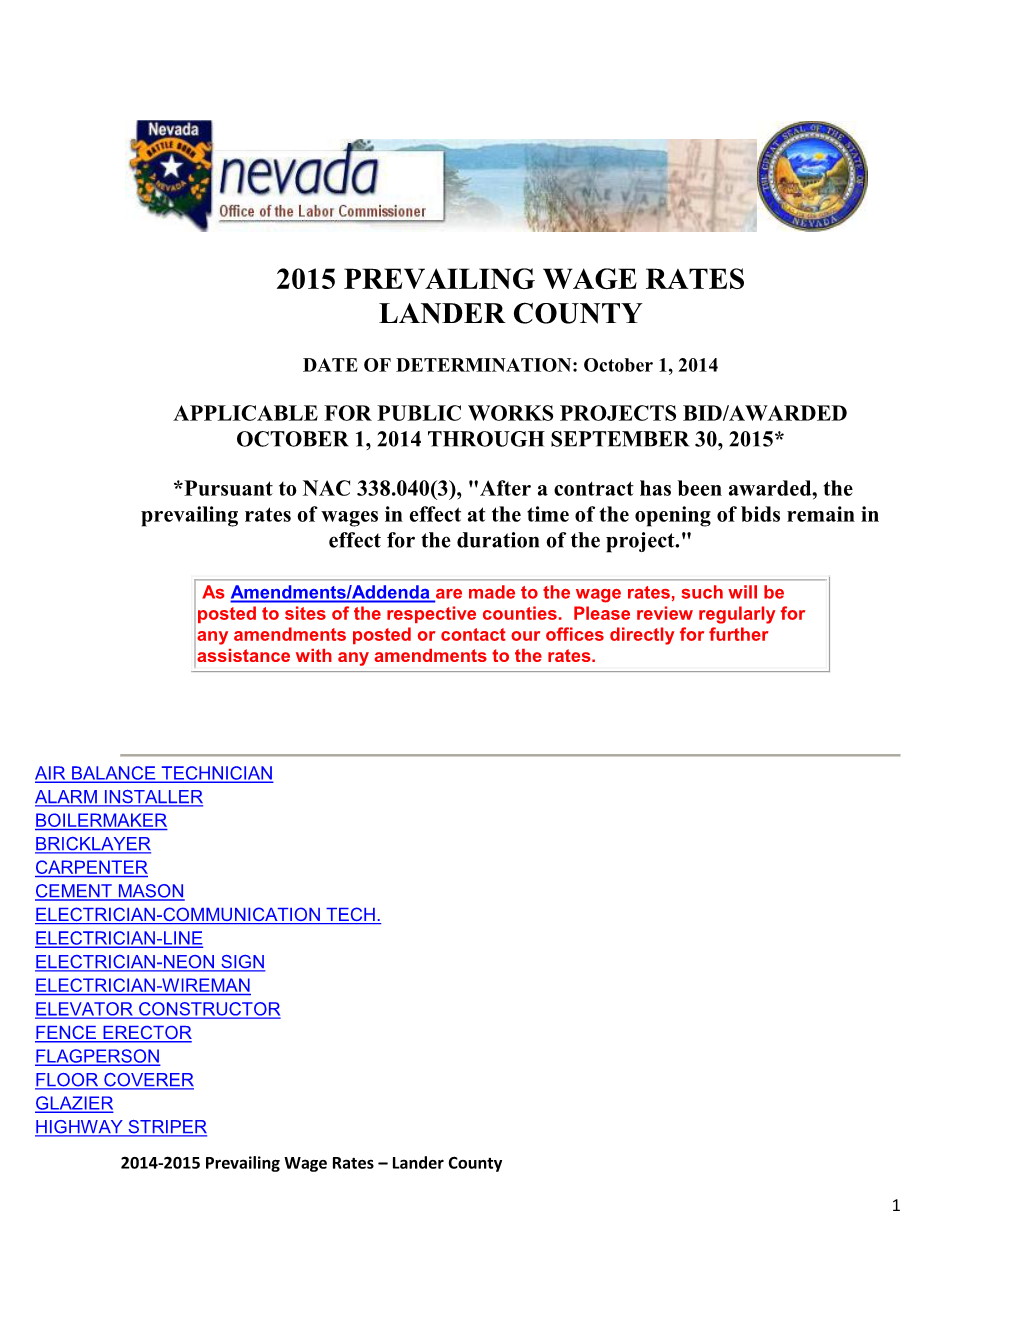 2015 Prevailing Wage Rates Lander County